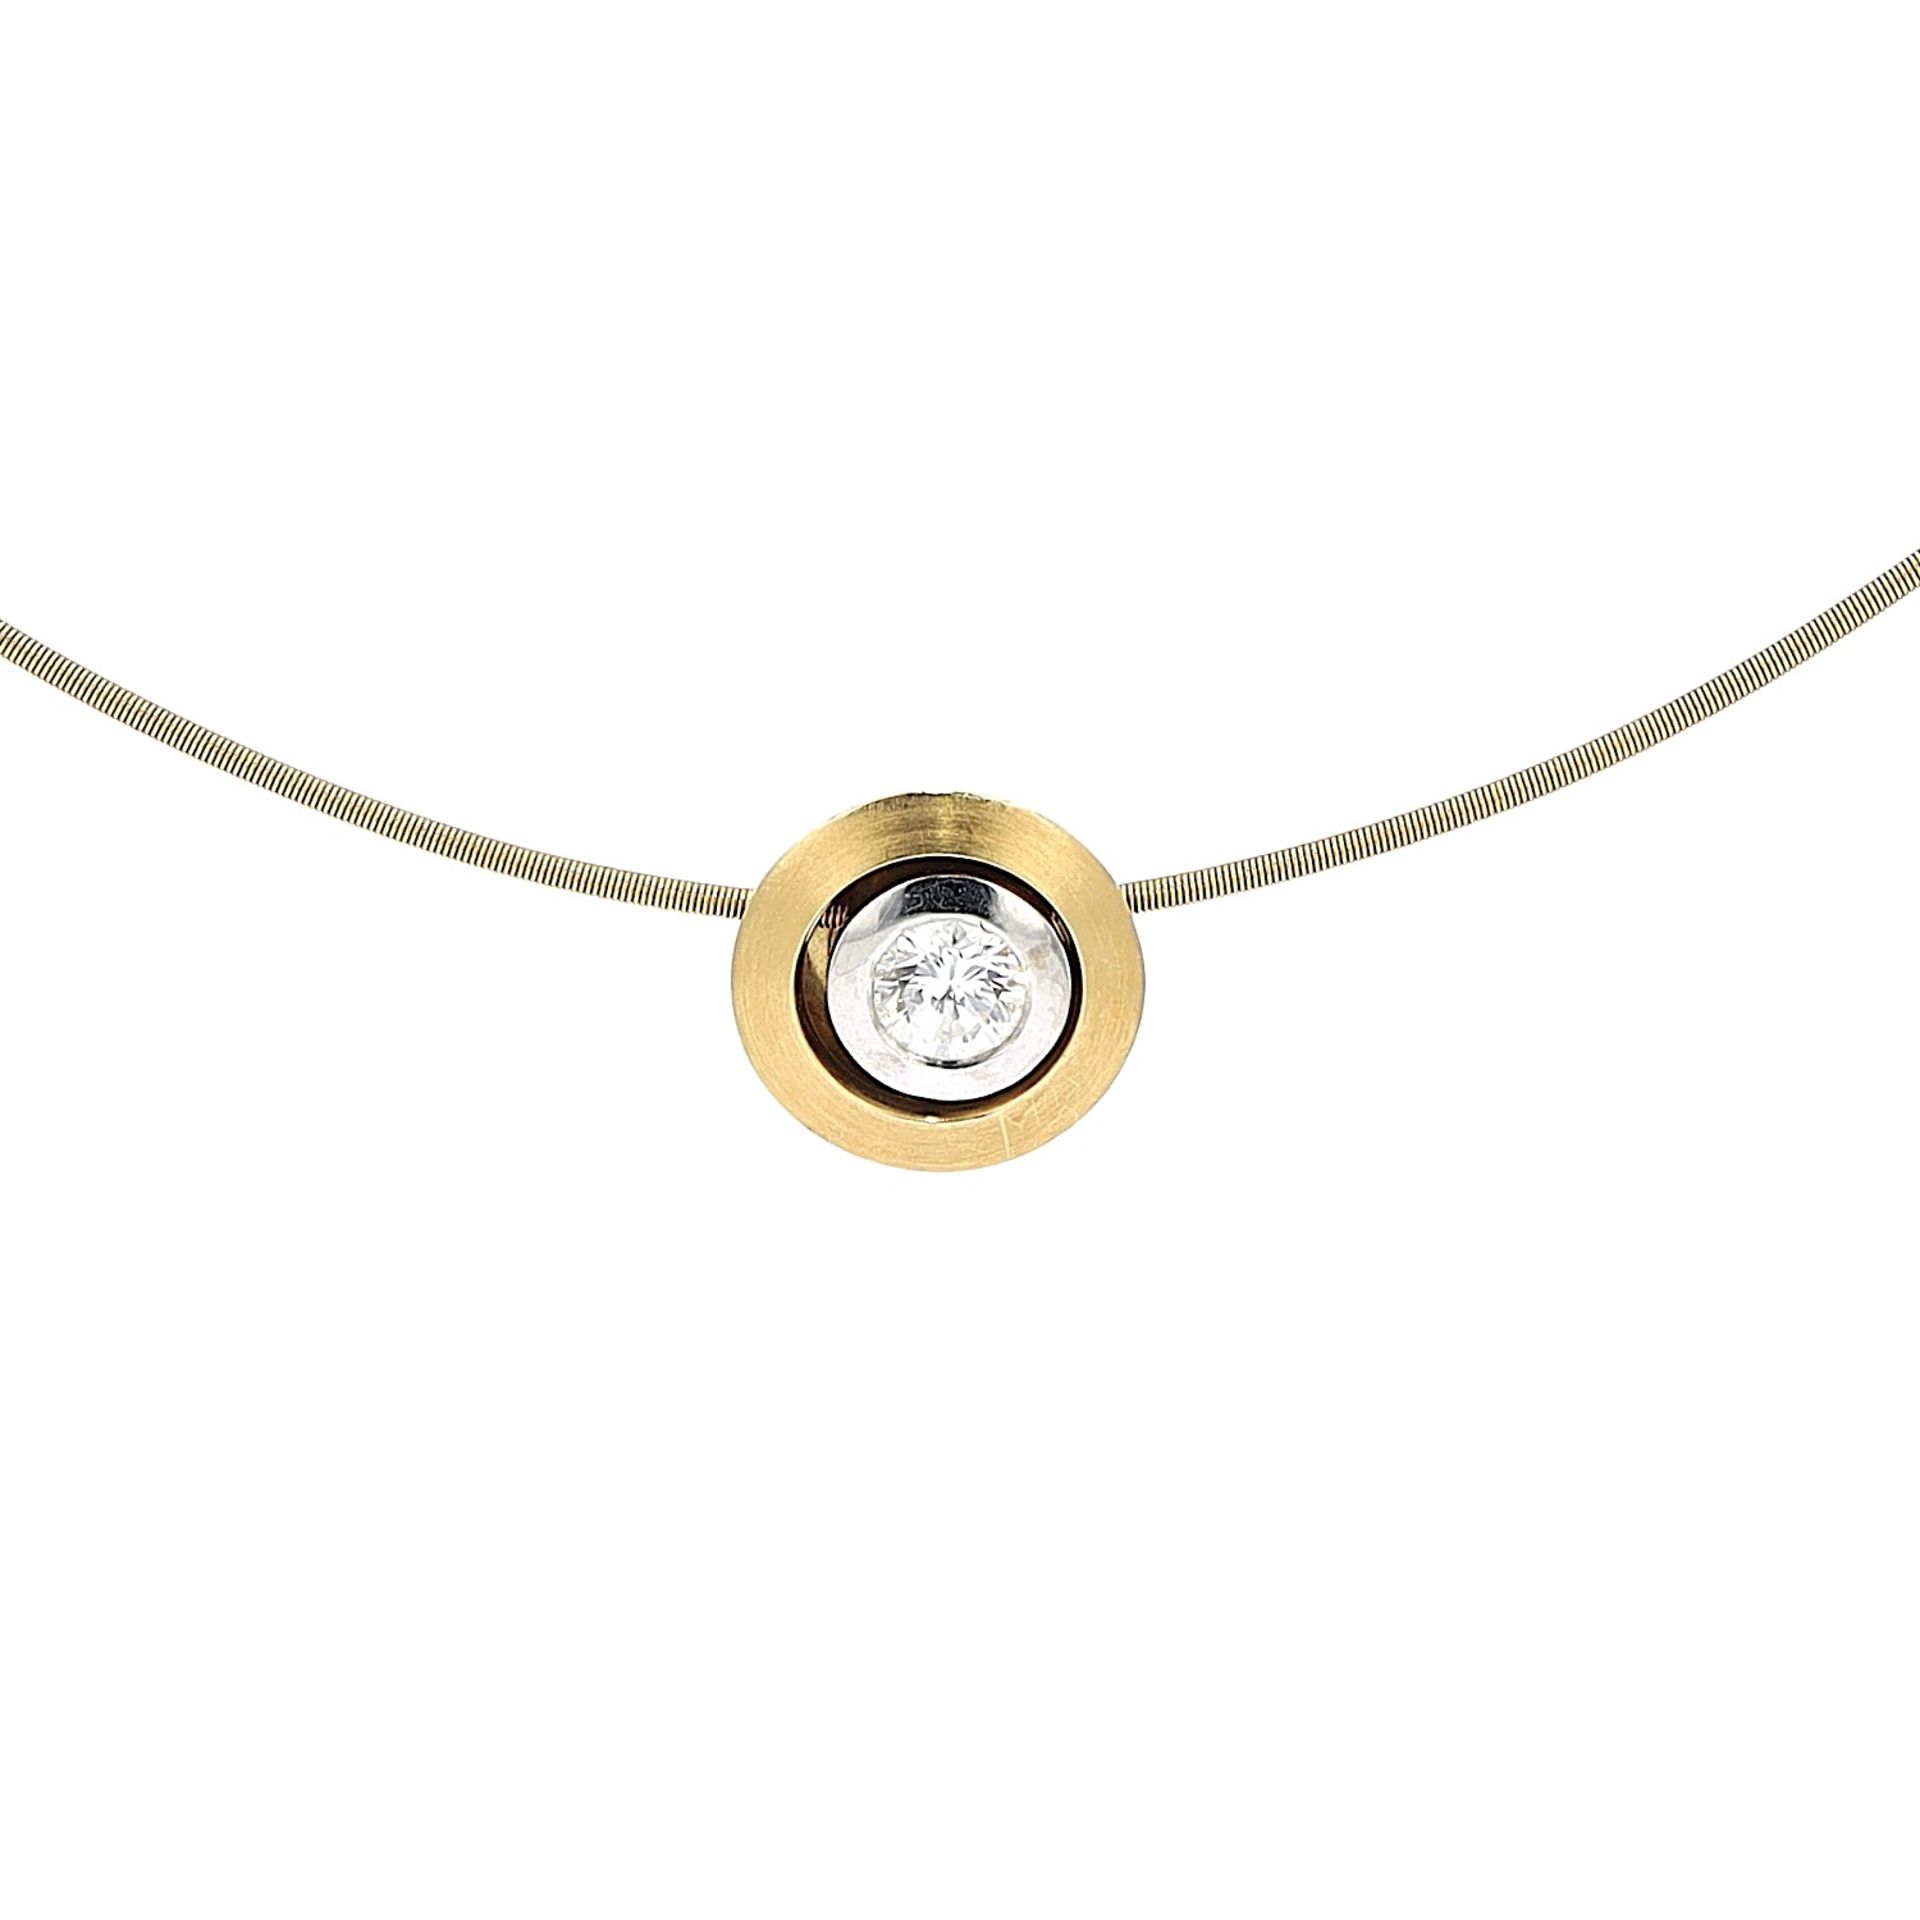 Necklace 750 gold Niessing, pendant with brilliant - Image 4 of 7